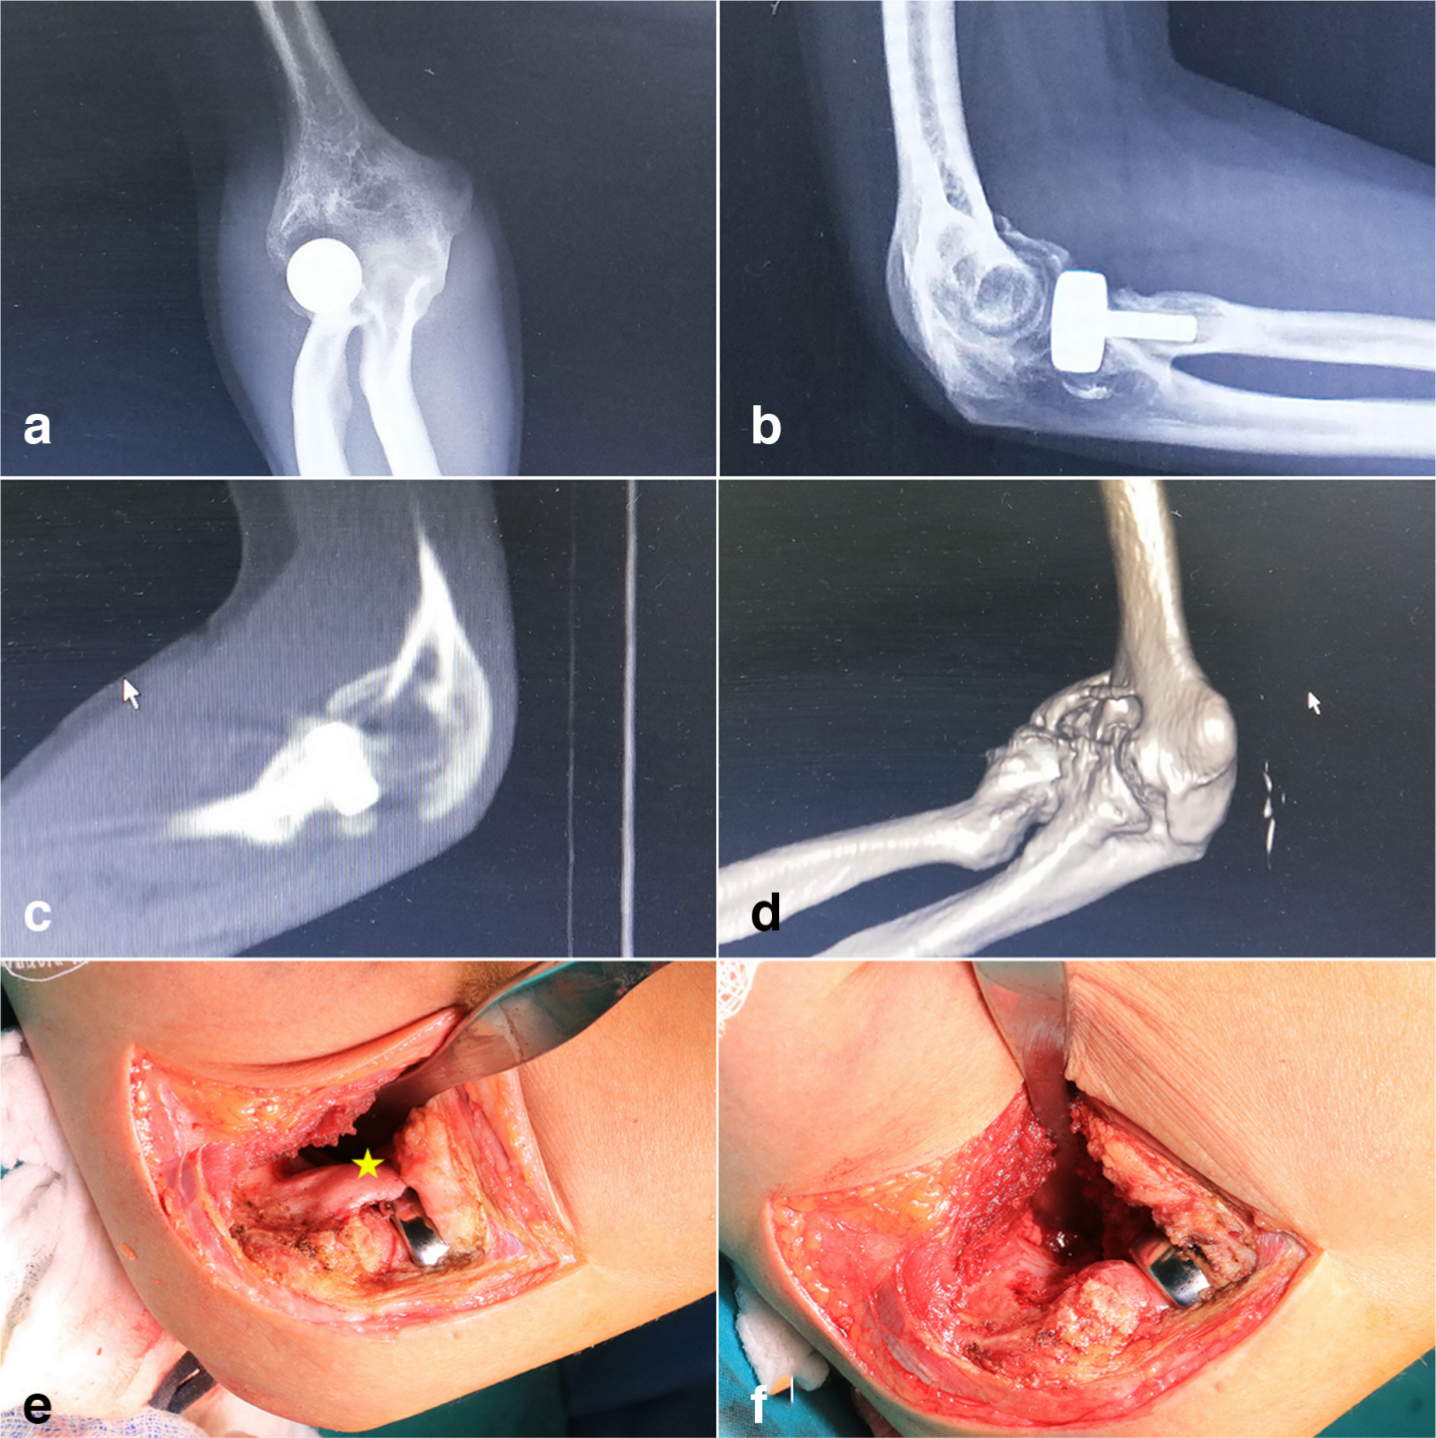 Fig. 2 
            Anterior ectopic bone excision (block removal). a,b) Radiograph, c) sagittal view of calculated tomography (CT), and d) 3D CT reconstruction show heterotopic ossification (HO) in the anterior elbow. e) An irregularly shaped HO (*, yellow) originated from distal humerus can be seen in the anterior elbow from the operative field. f) The ectopic bone is excised under direct visualization intraoperatively.
          